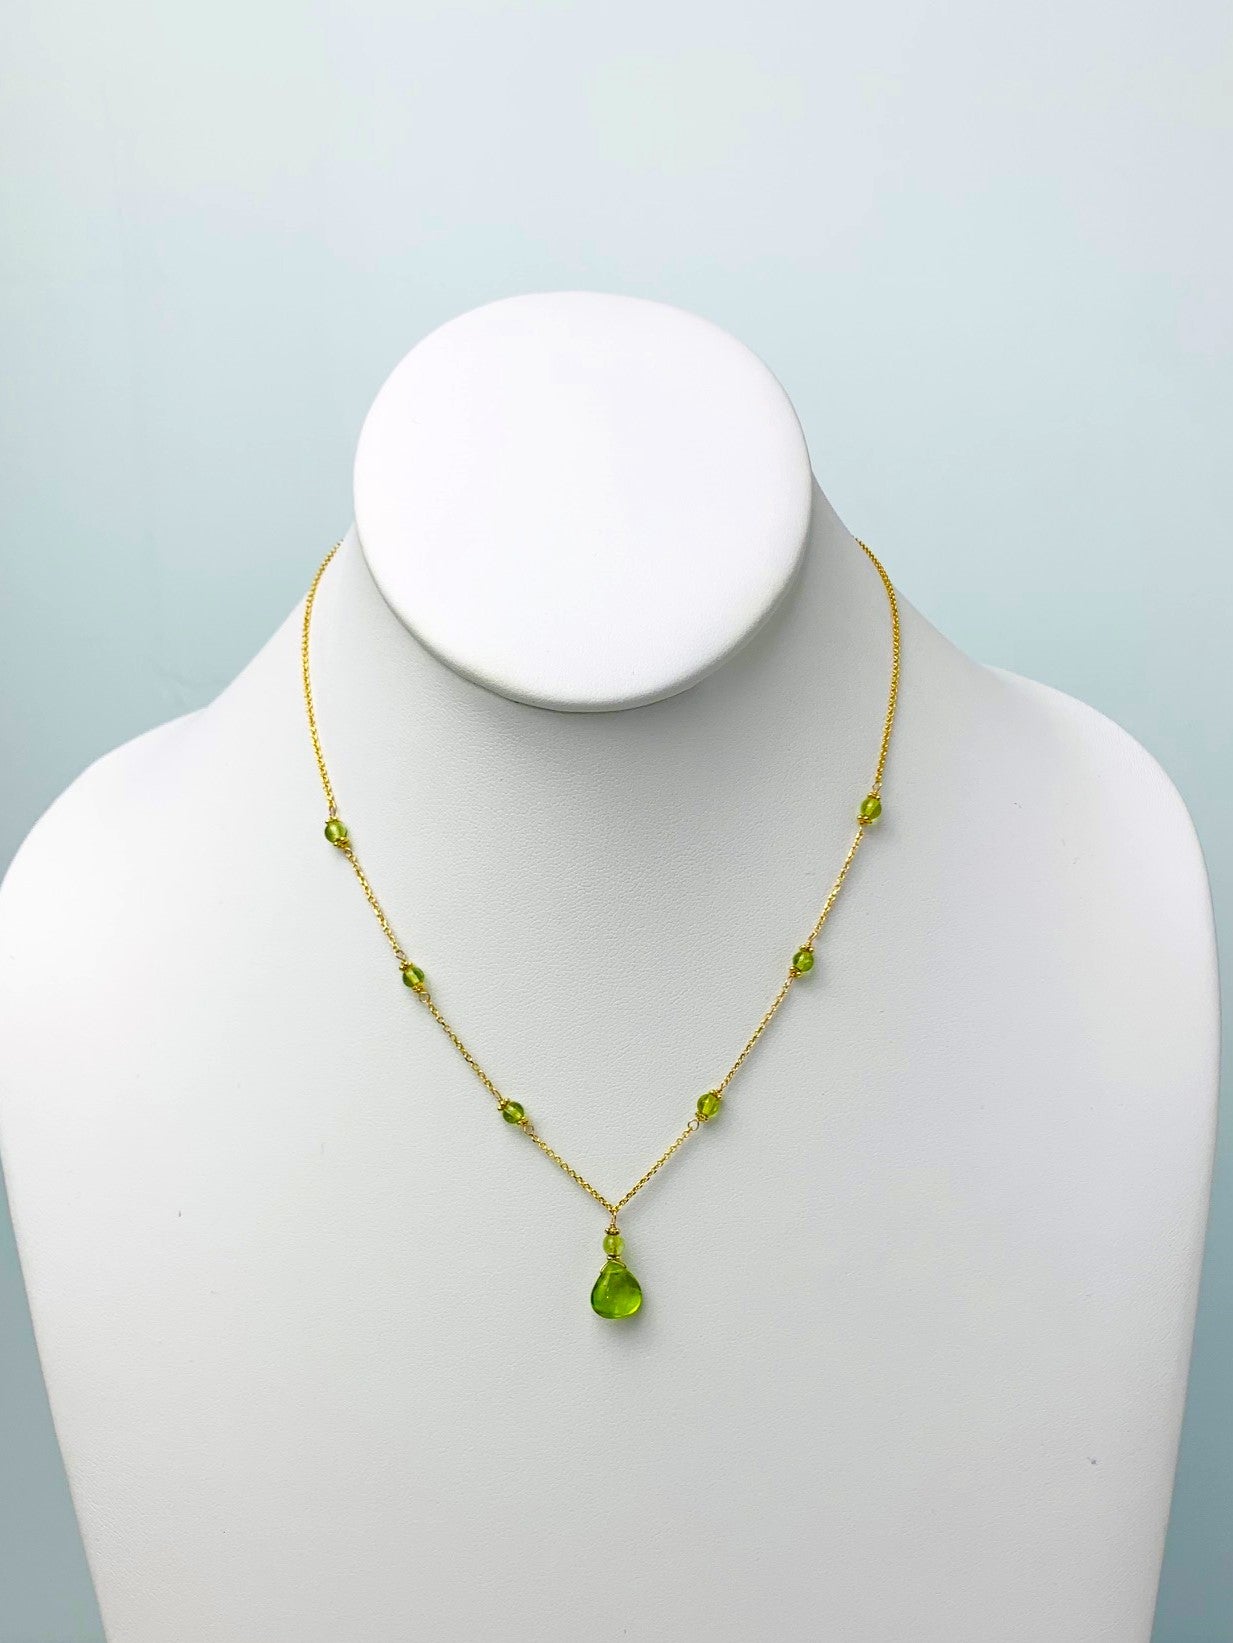 16"-17" Peridot Station Necklace With Center Drop in 14KY - NCK-447-DRPGM14Y-PDT-17